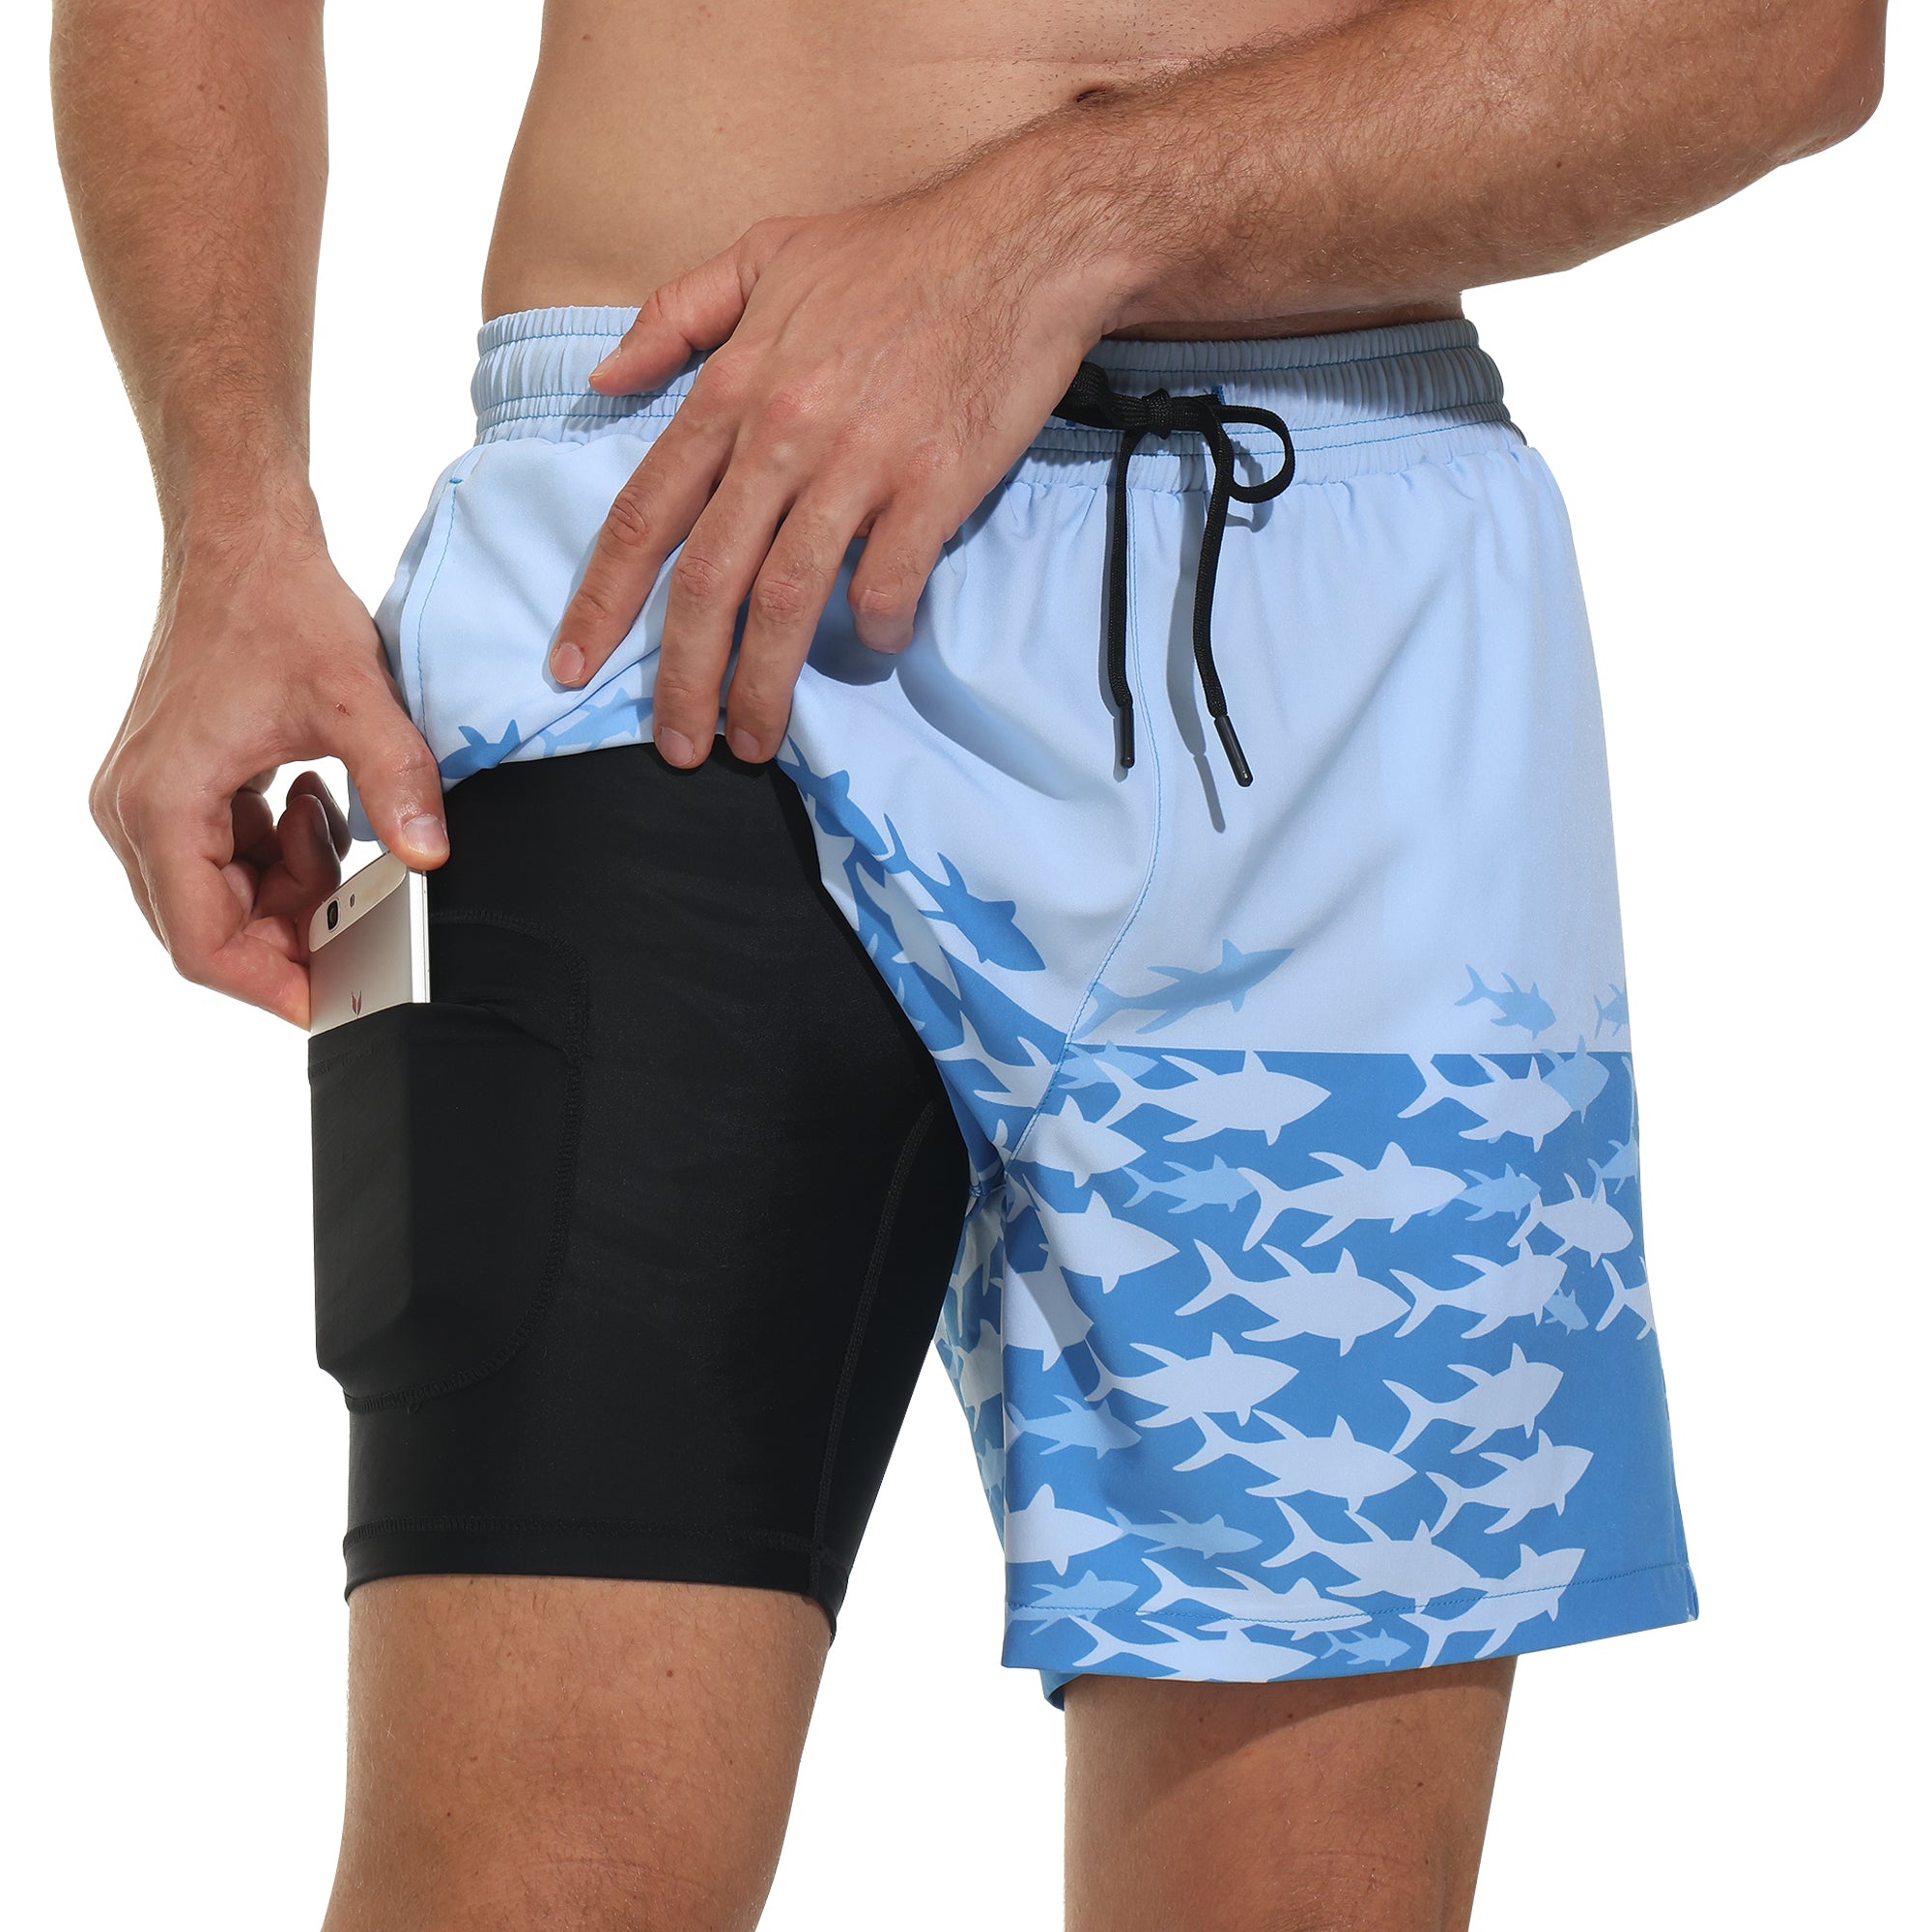 SILKWORLD Men's Swim Trunks with Compression Liner 7 Inch Inseam Swimsuit  with Zipper Pockets, Stripe(Blue), X-Small